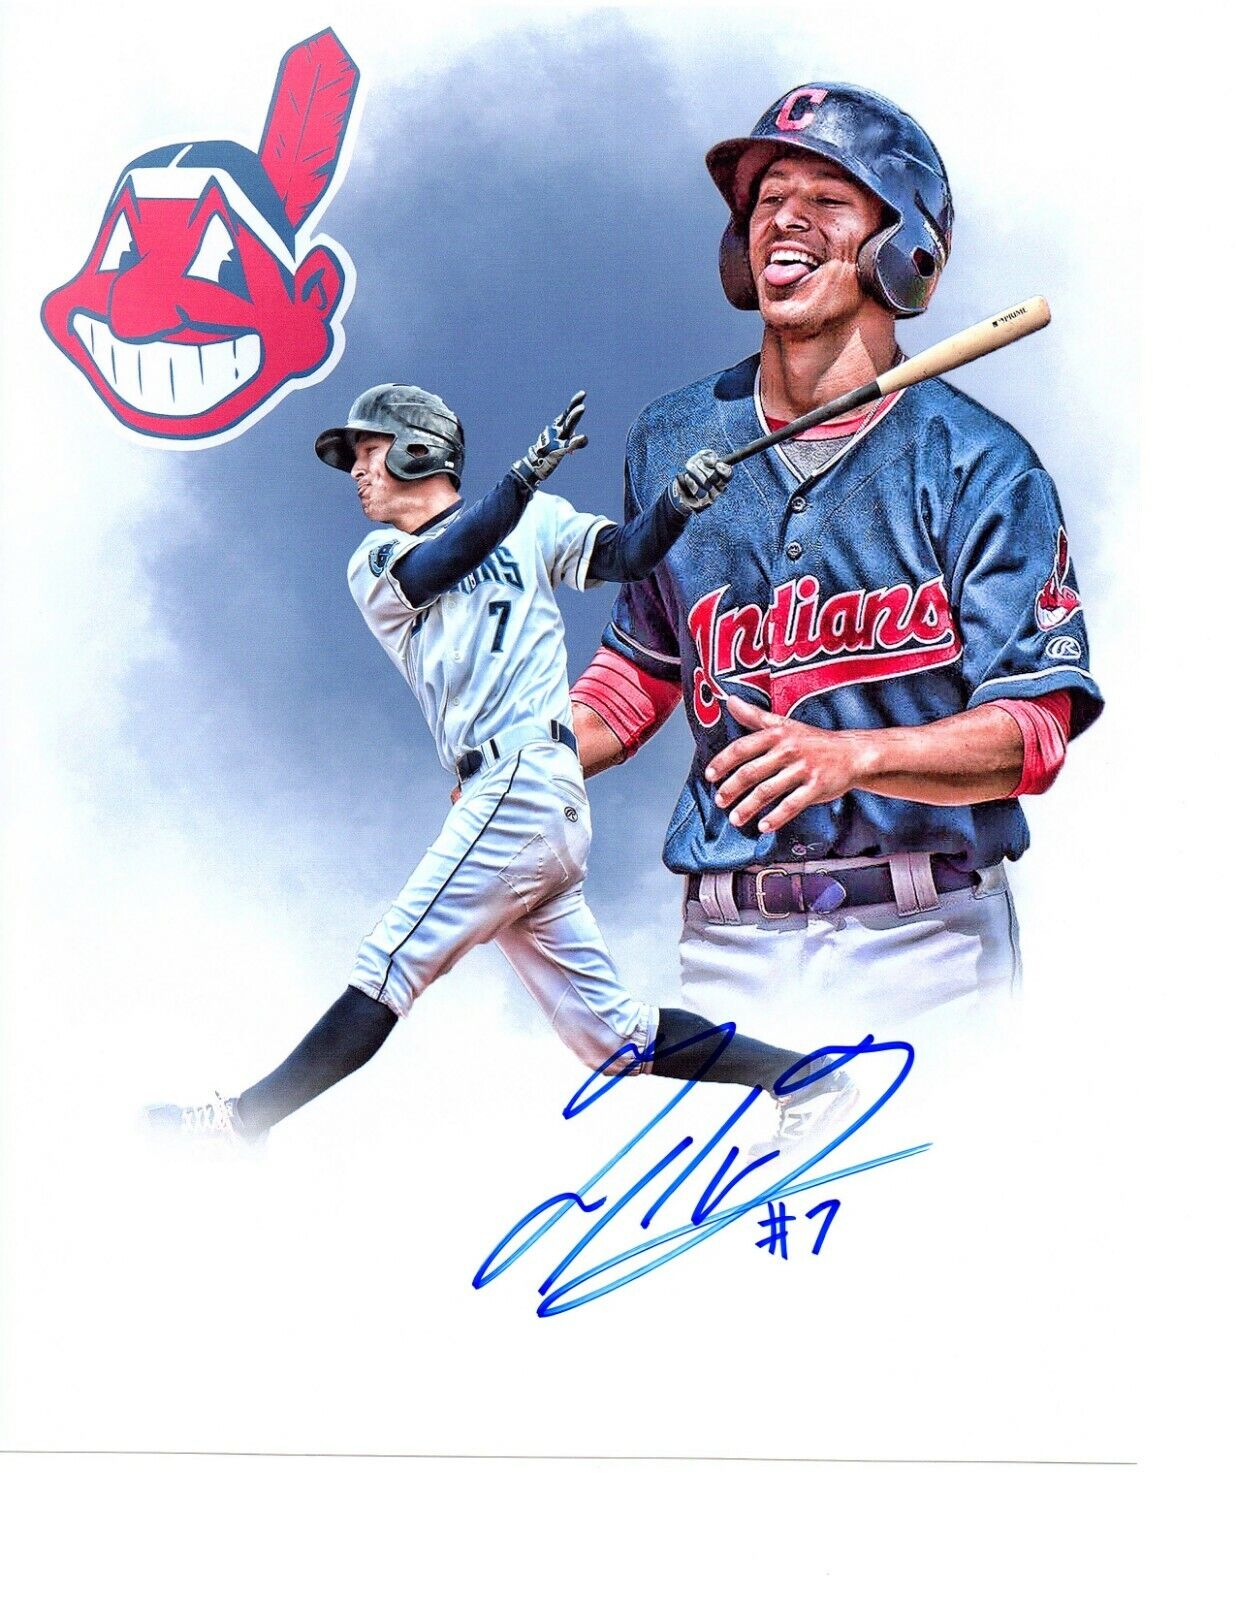 Tyler man signed 8x10 Photo Poster painting autograph Cleveland Indians Prospect baseball+